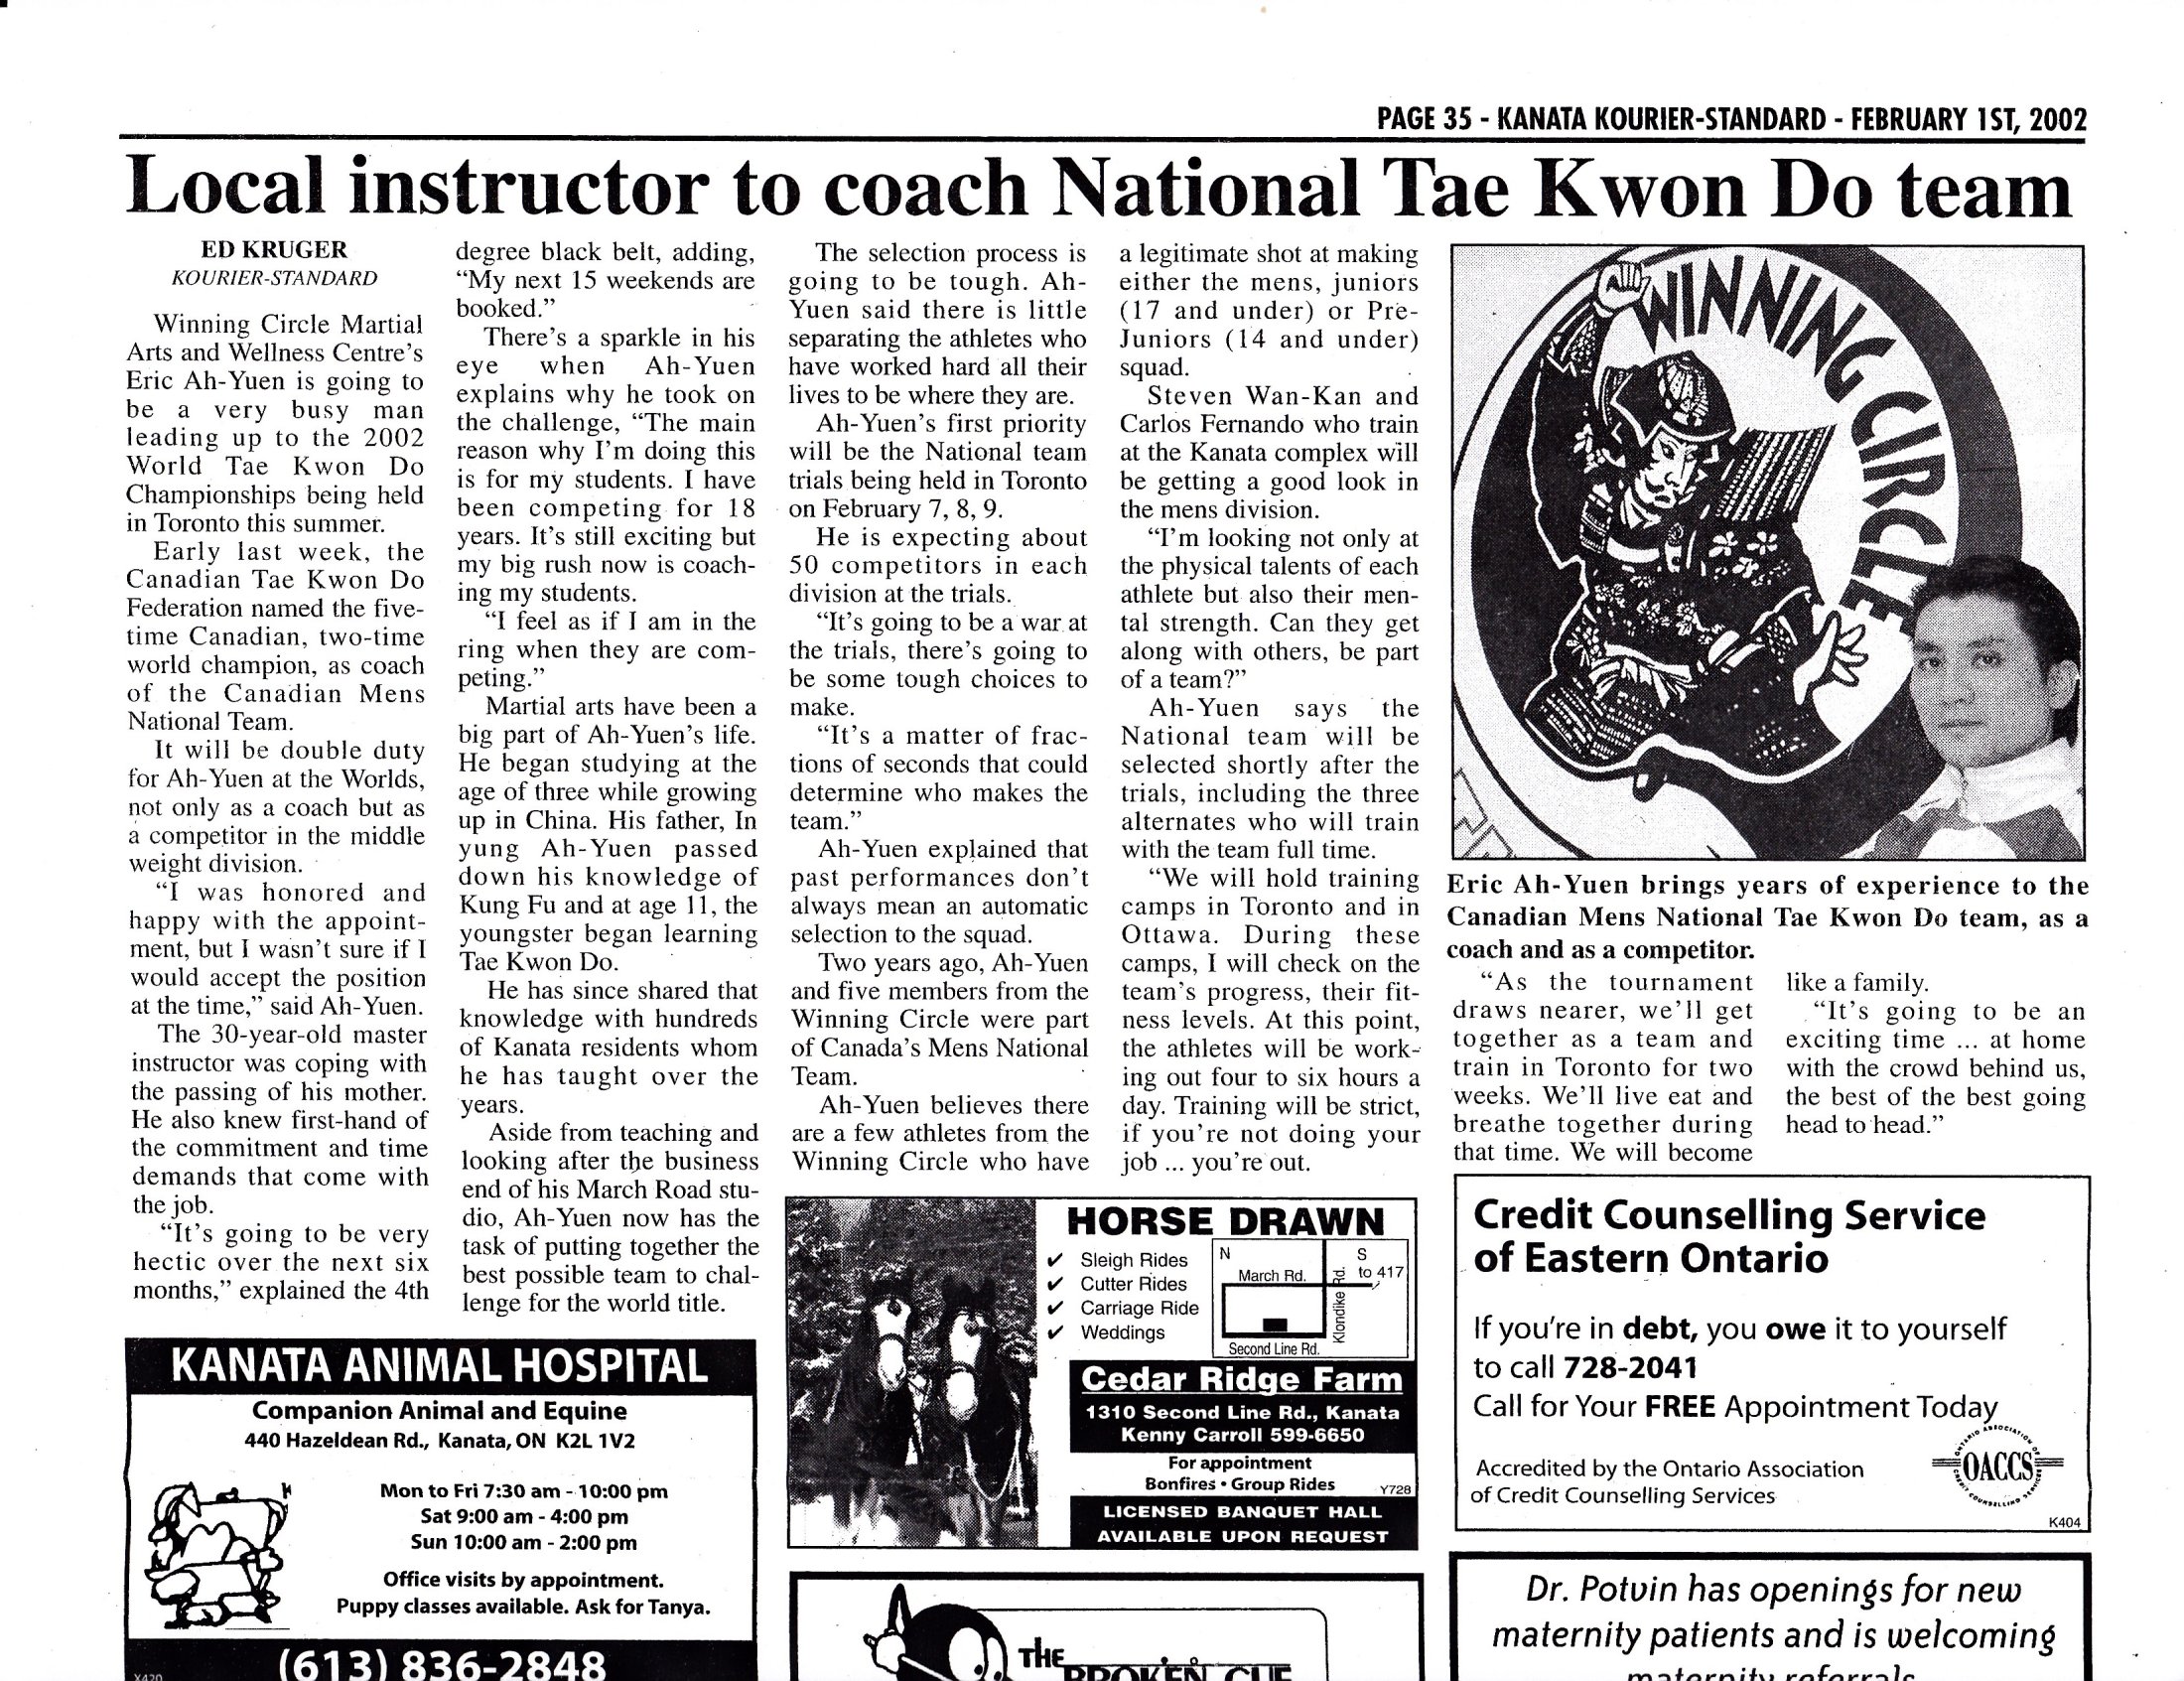 Kourier-Standard 2002 \'\'Local Instructor to coach National Tae Kwon Do Team\'\'